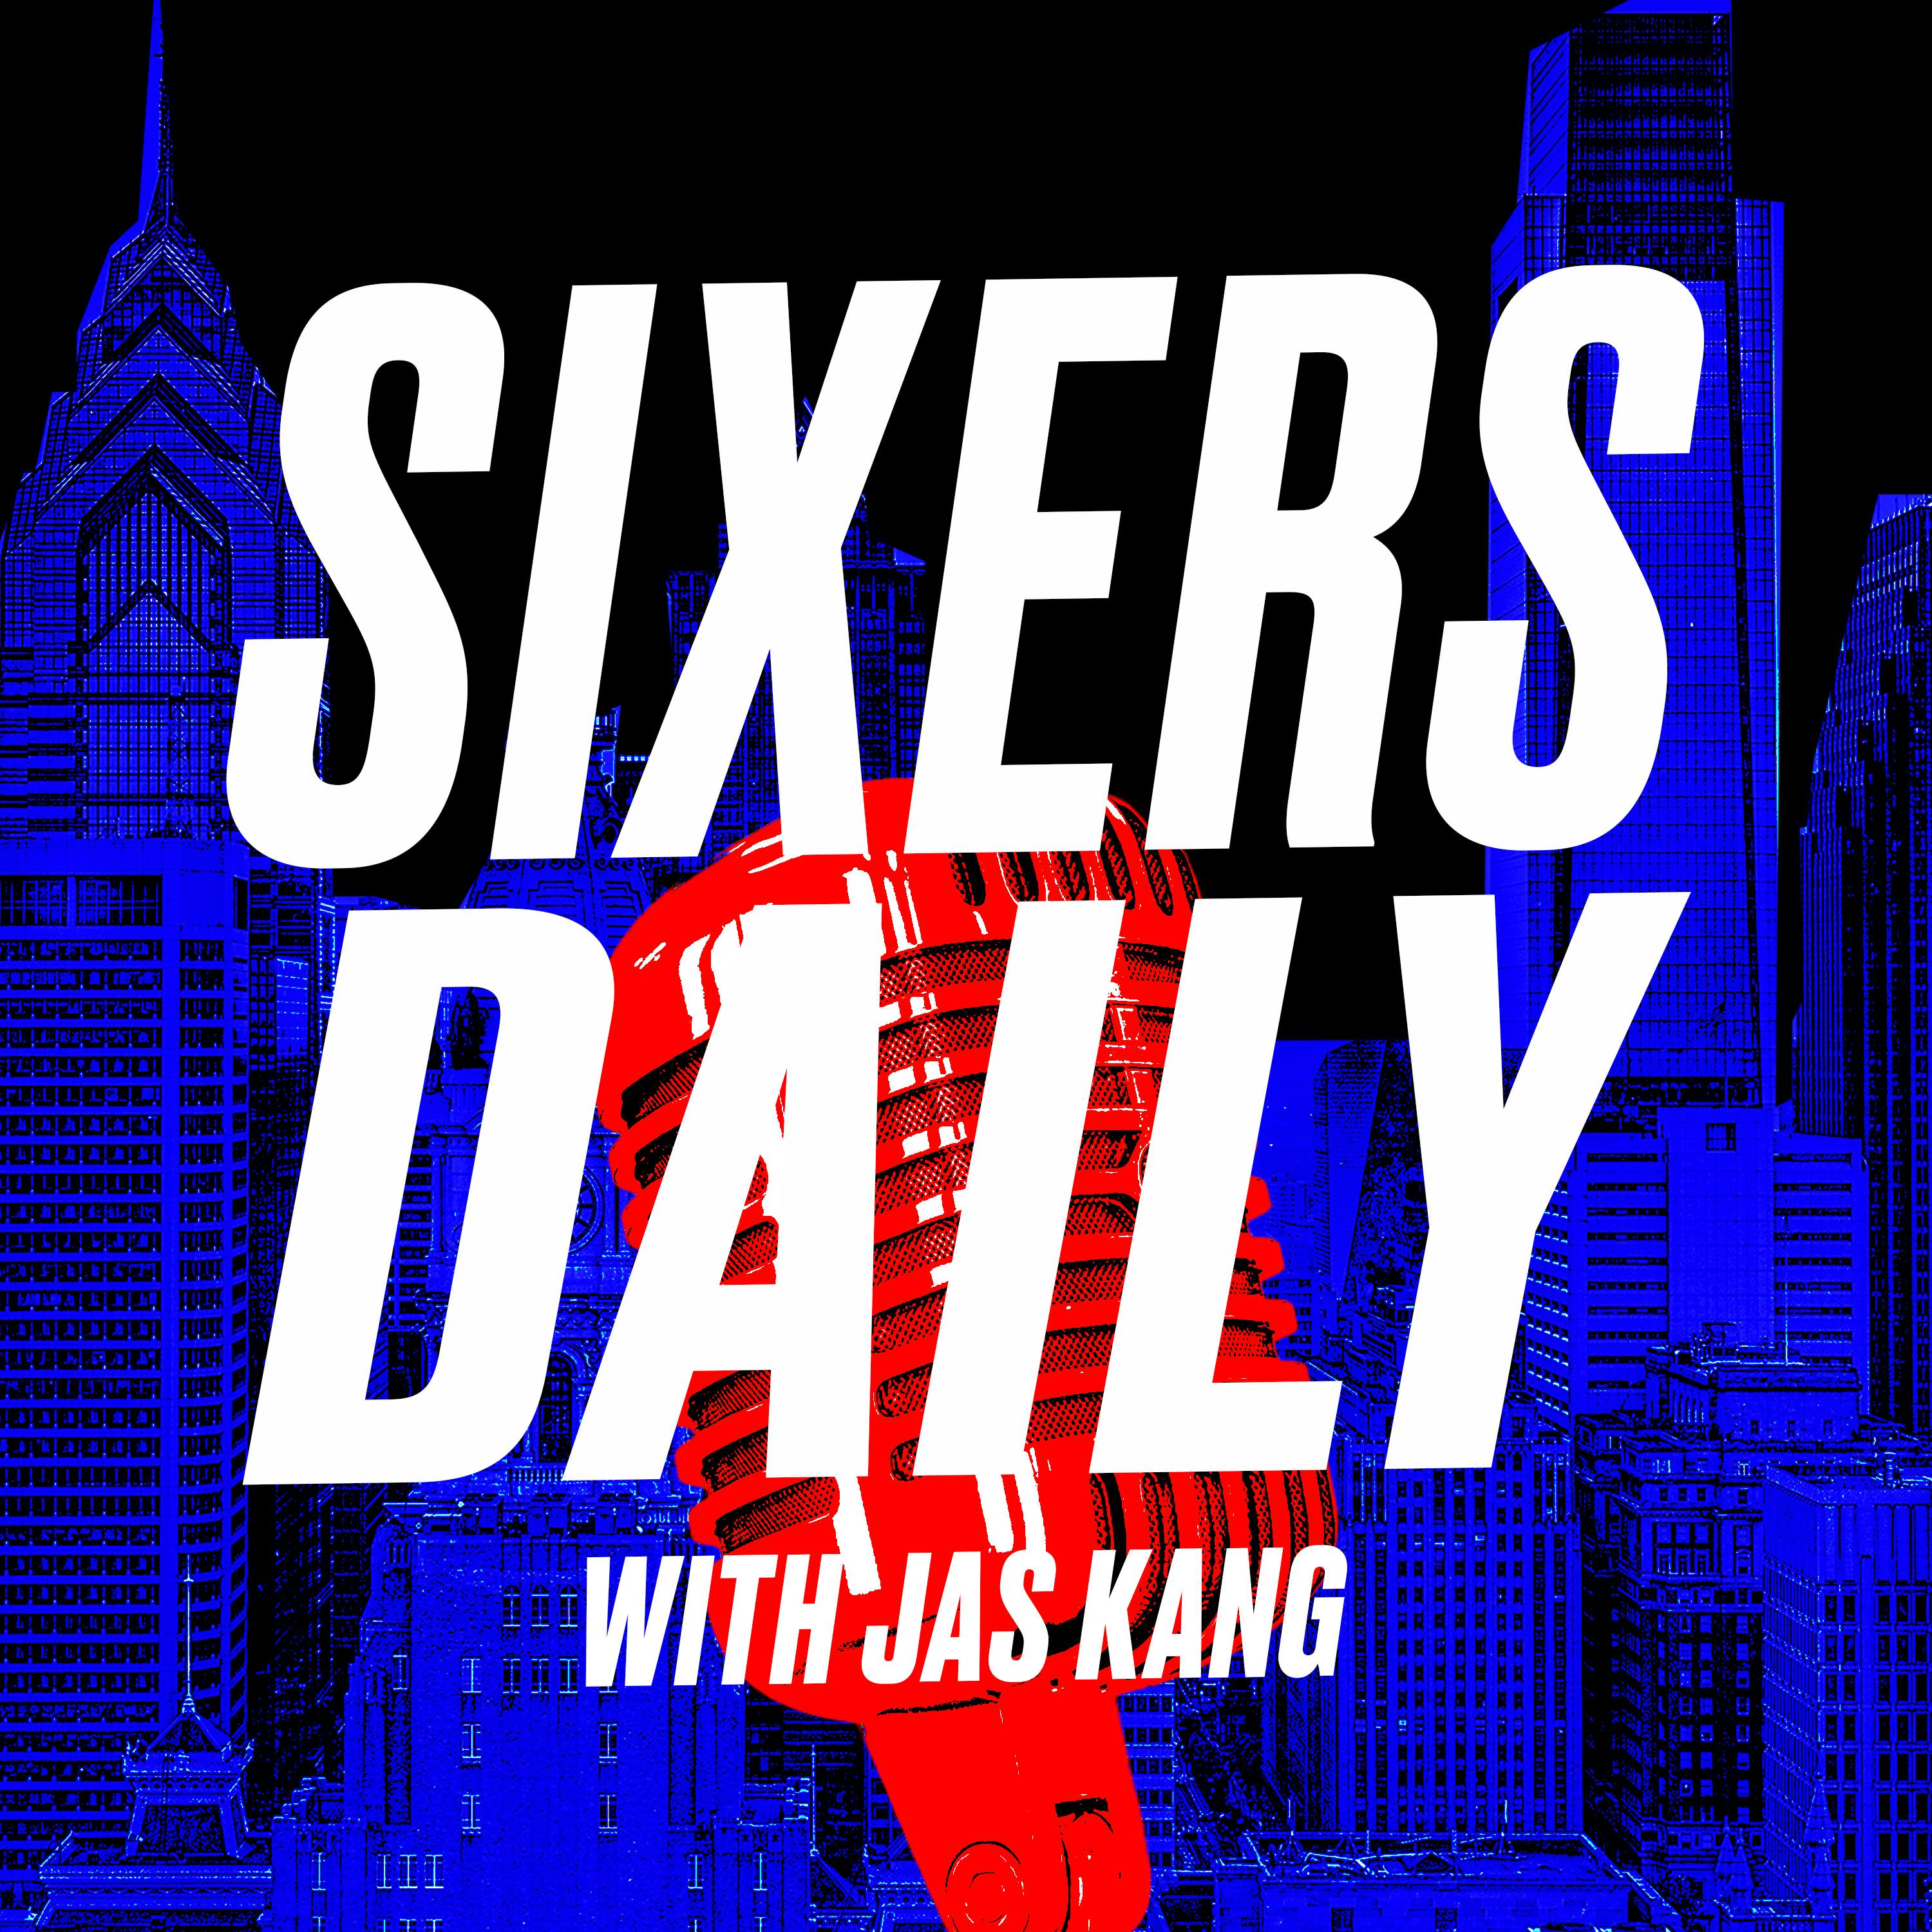 Sixers Daily with Jas Kang (Part 1) - Paul Hudrick and Jackson Frank help preview the 2022 NBA Draft, potential targets for the Sixers, James Harden's contract and more